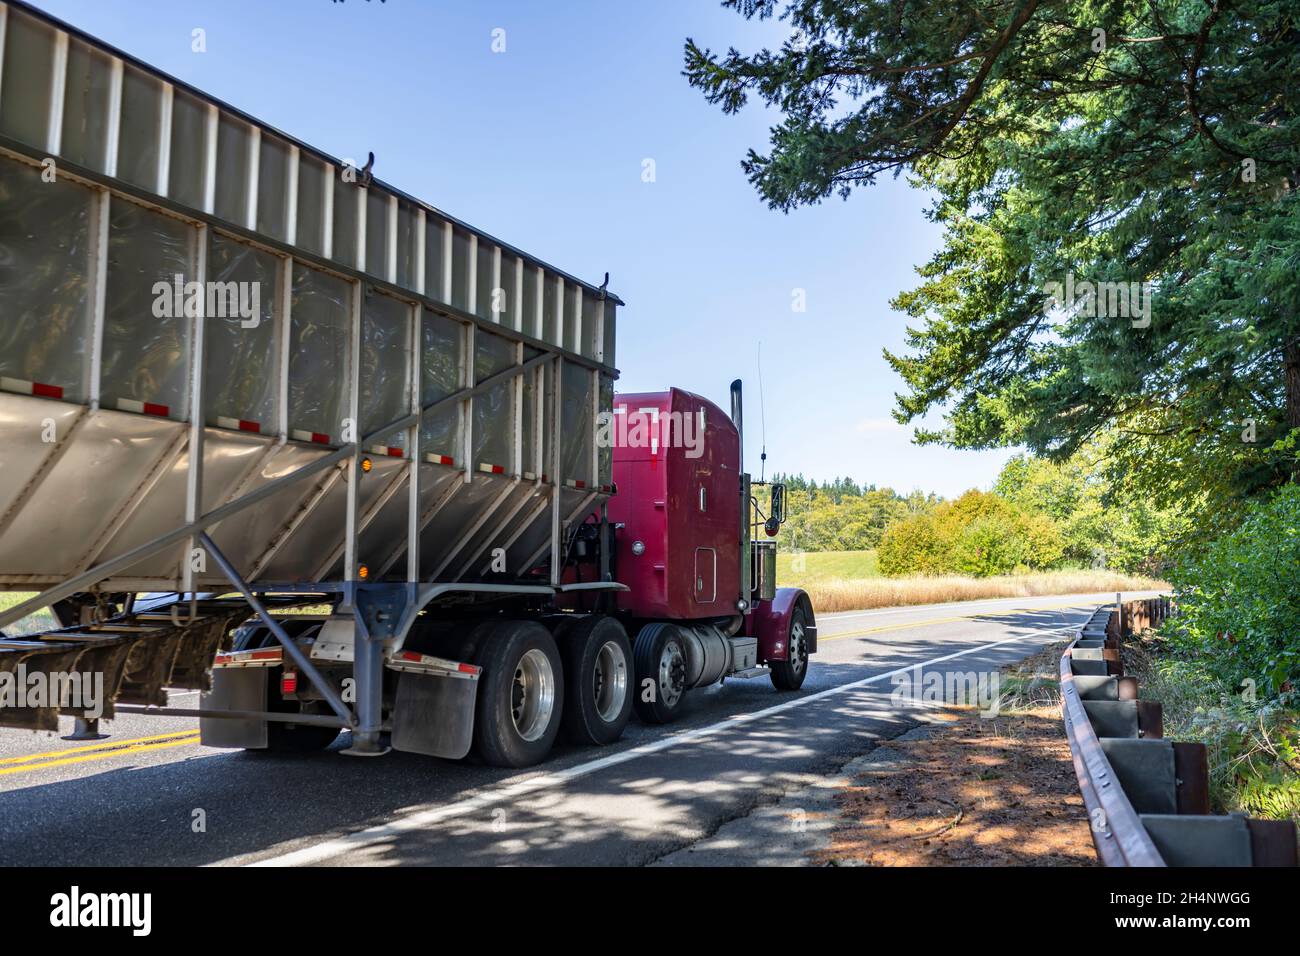 Classic big rig purple bonnet semi truck with high cab transporting commercial cargo in open bulk semi trailer running for delivery on the winding nar Stock Photo